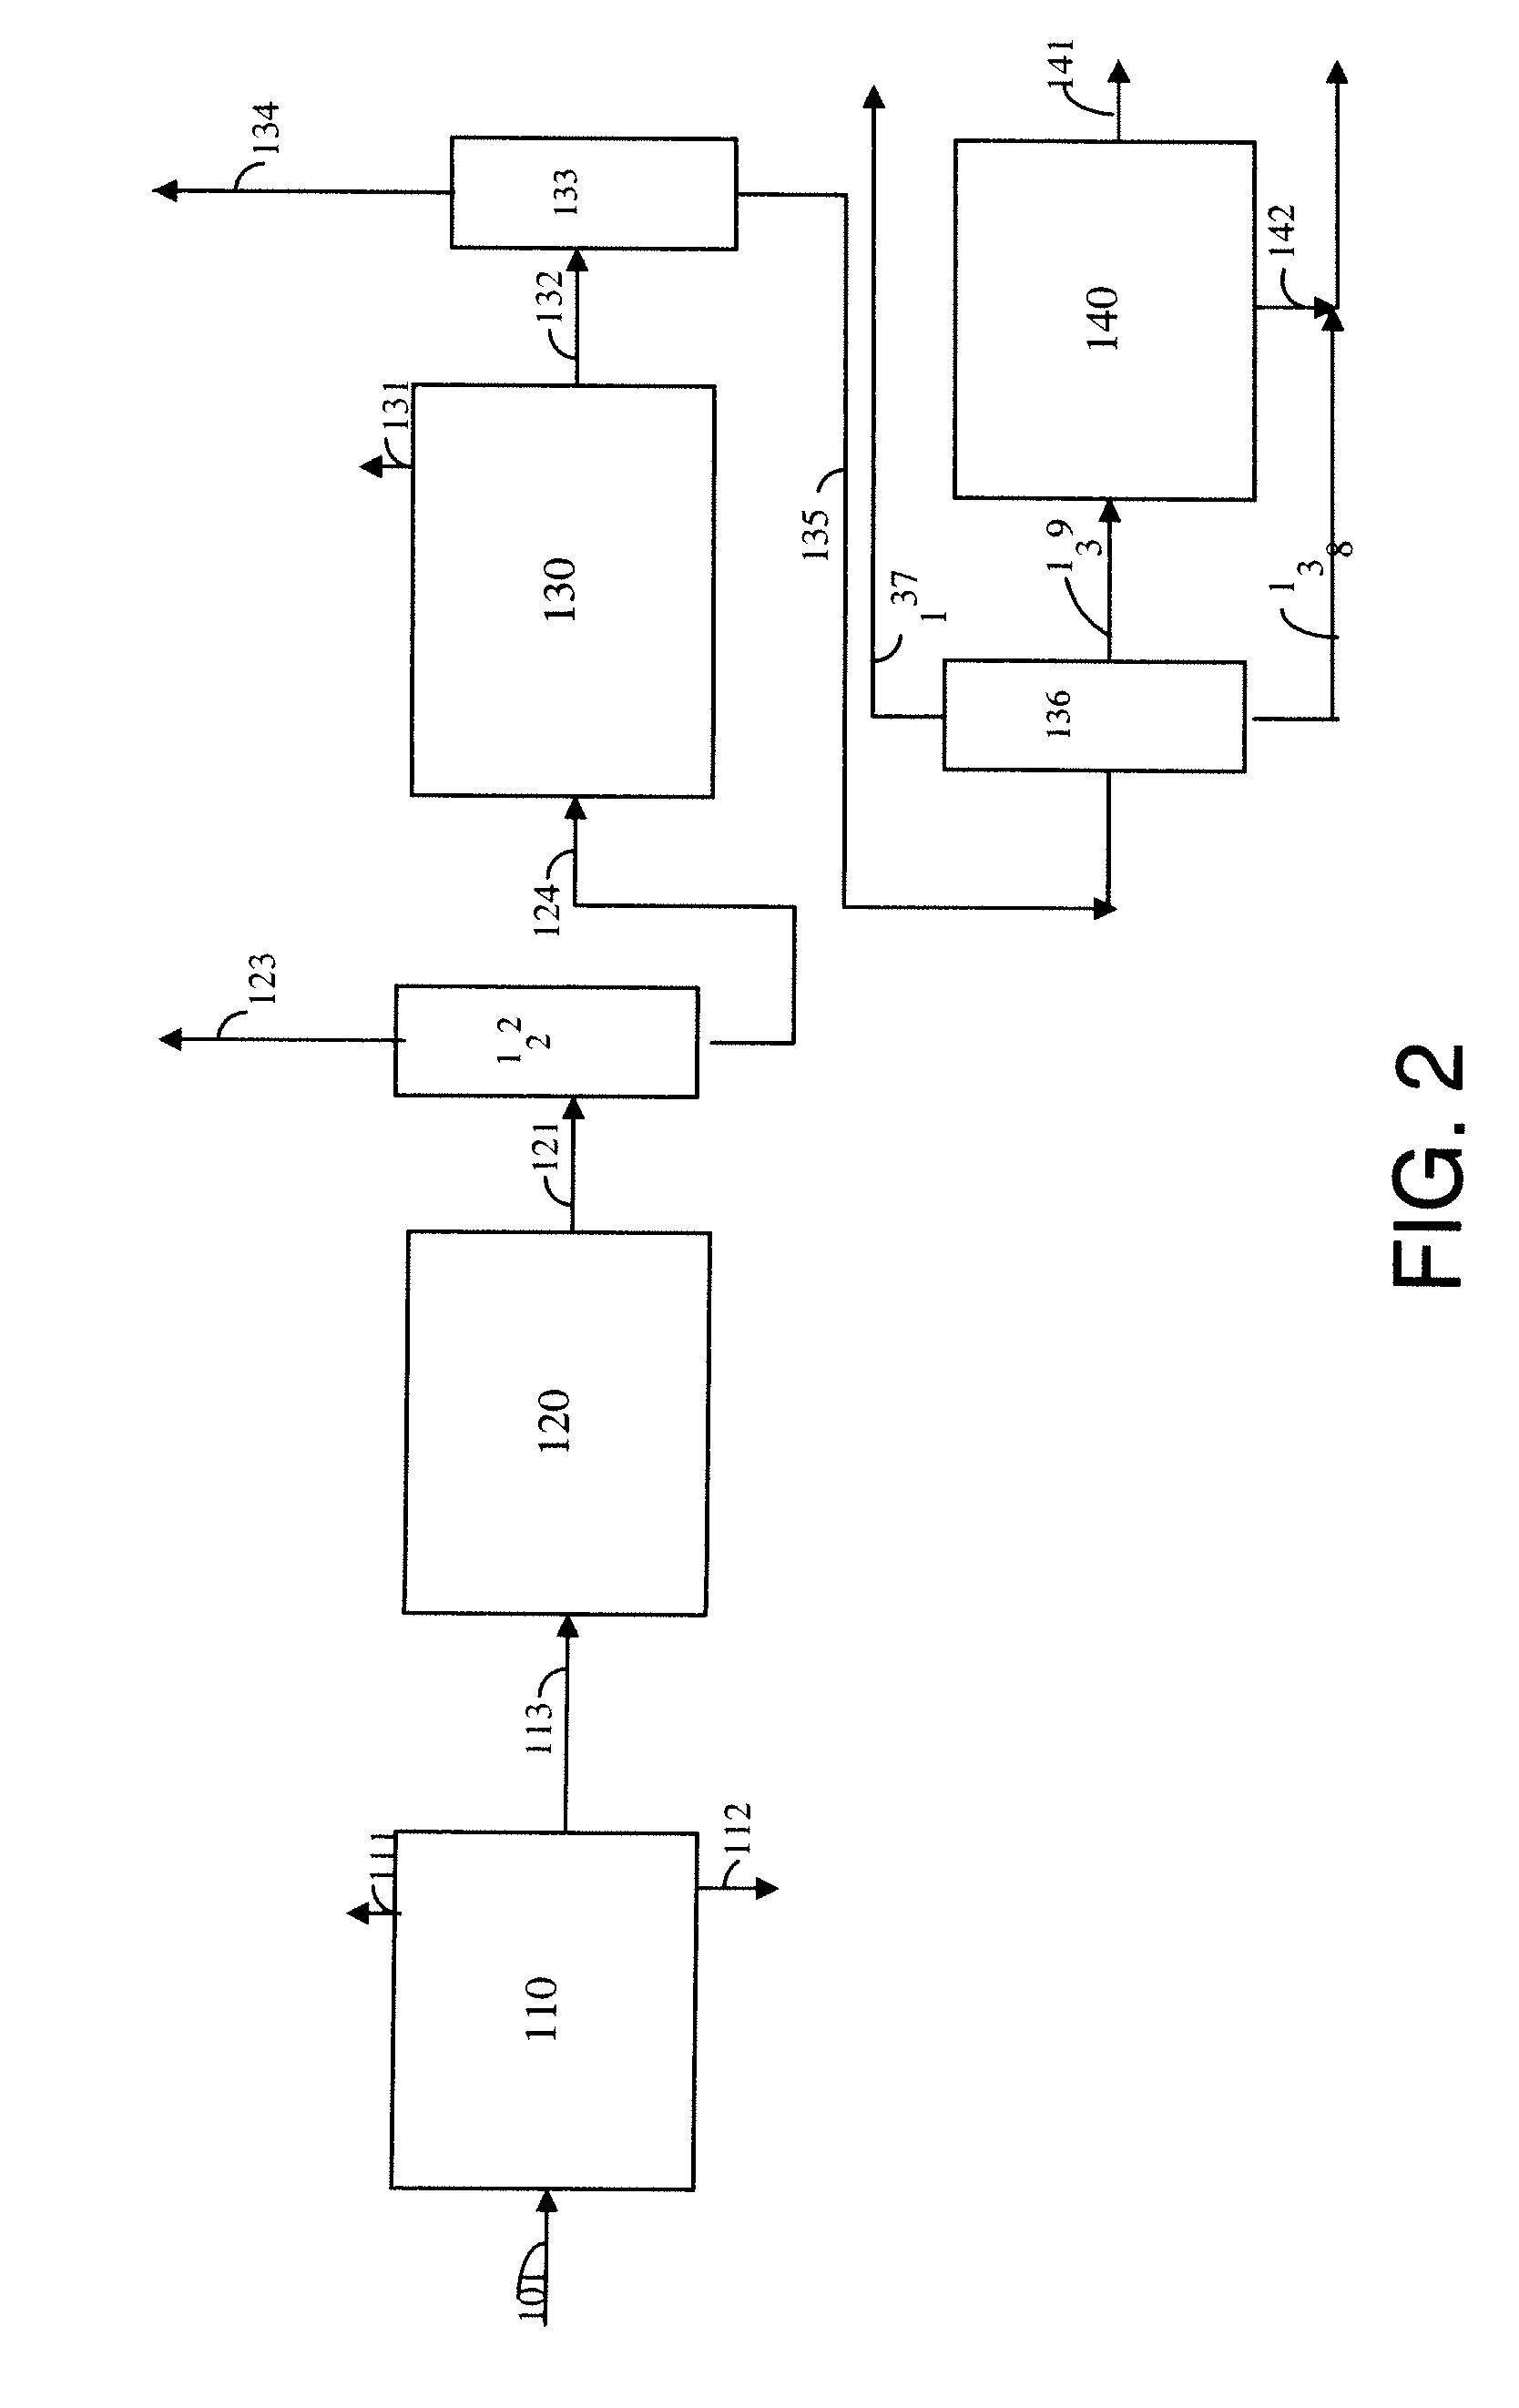 Process for para-xylene production from light aliphatics